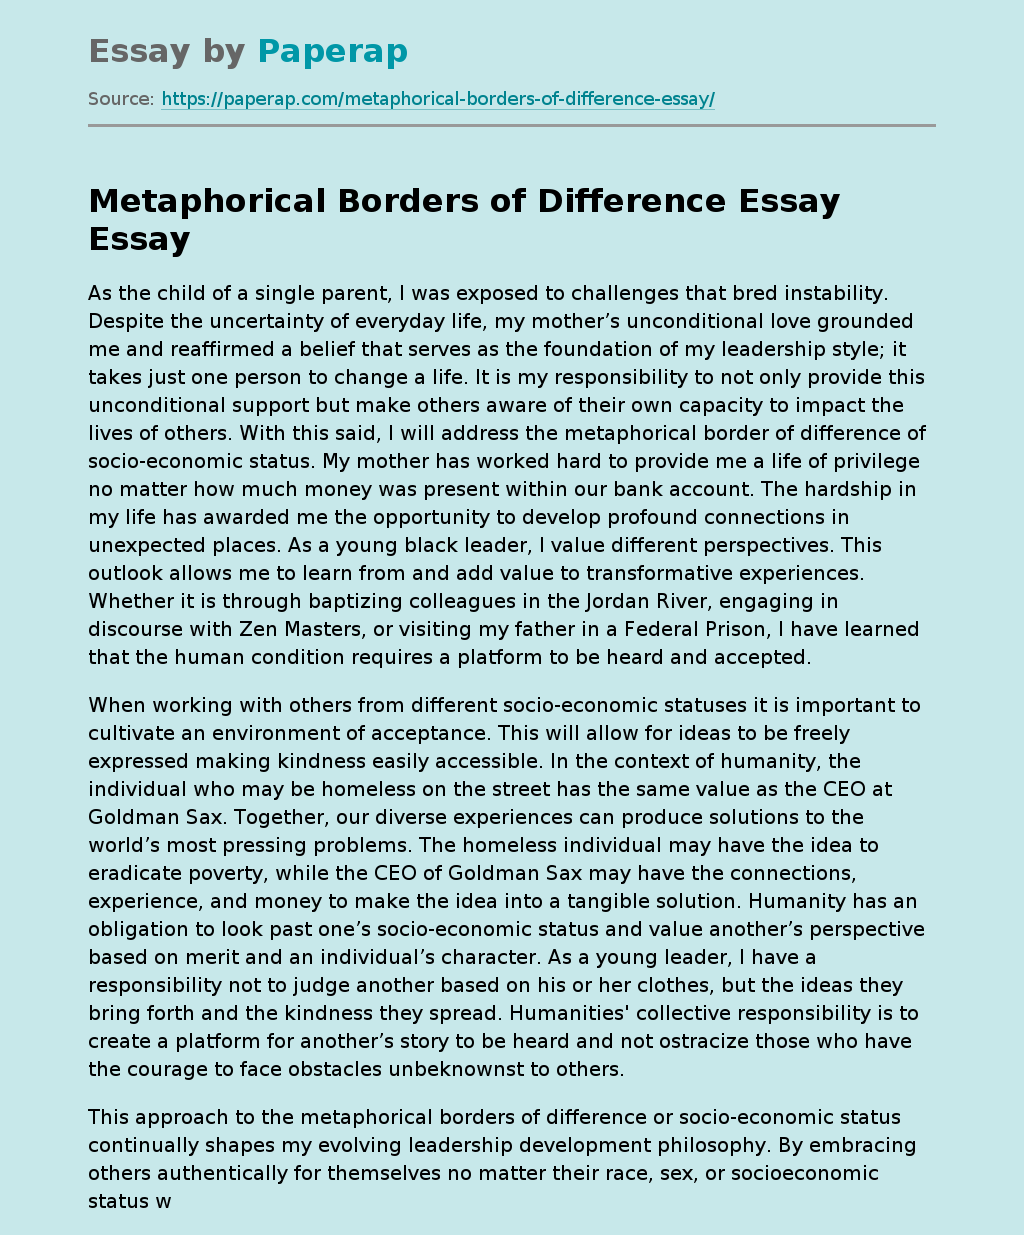 Metaphorical Borders of Difference Essay